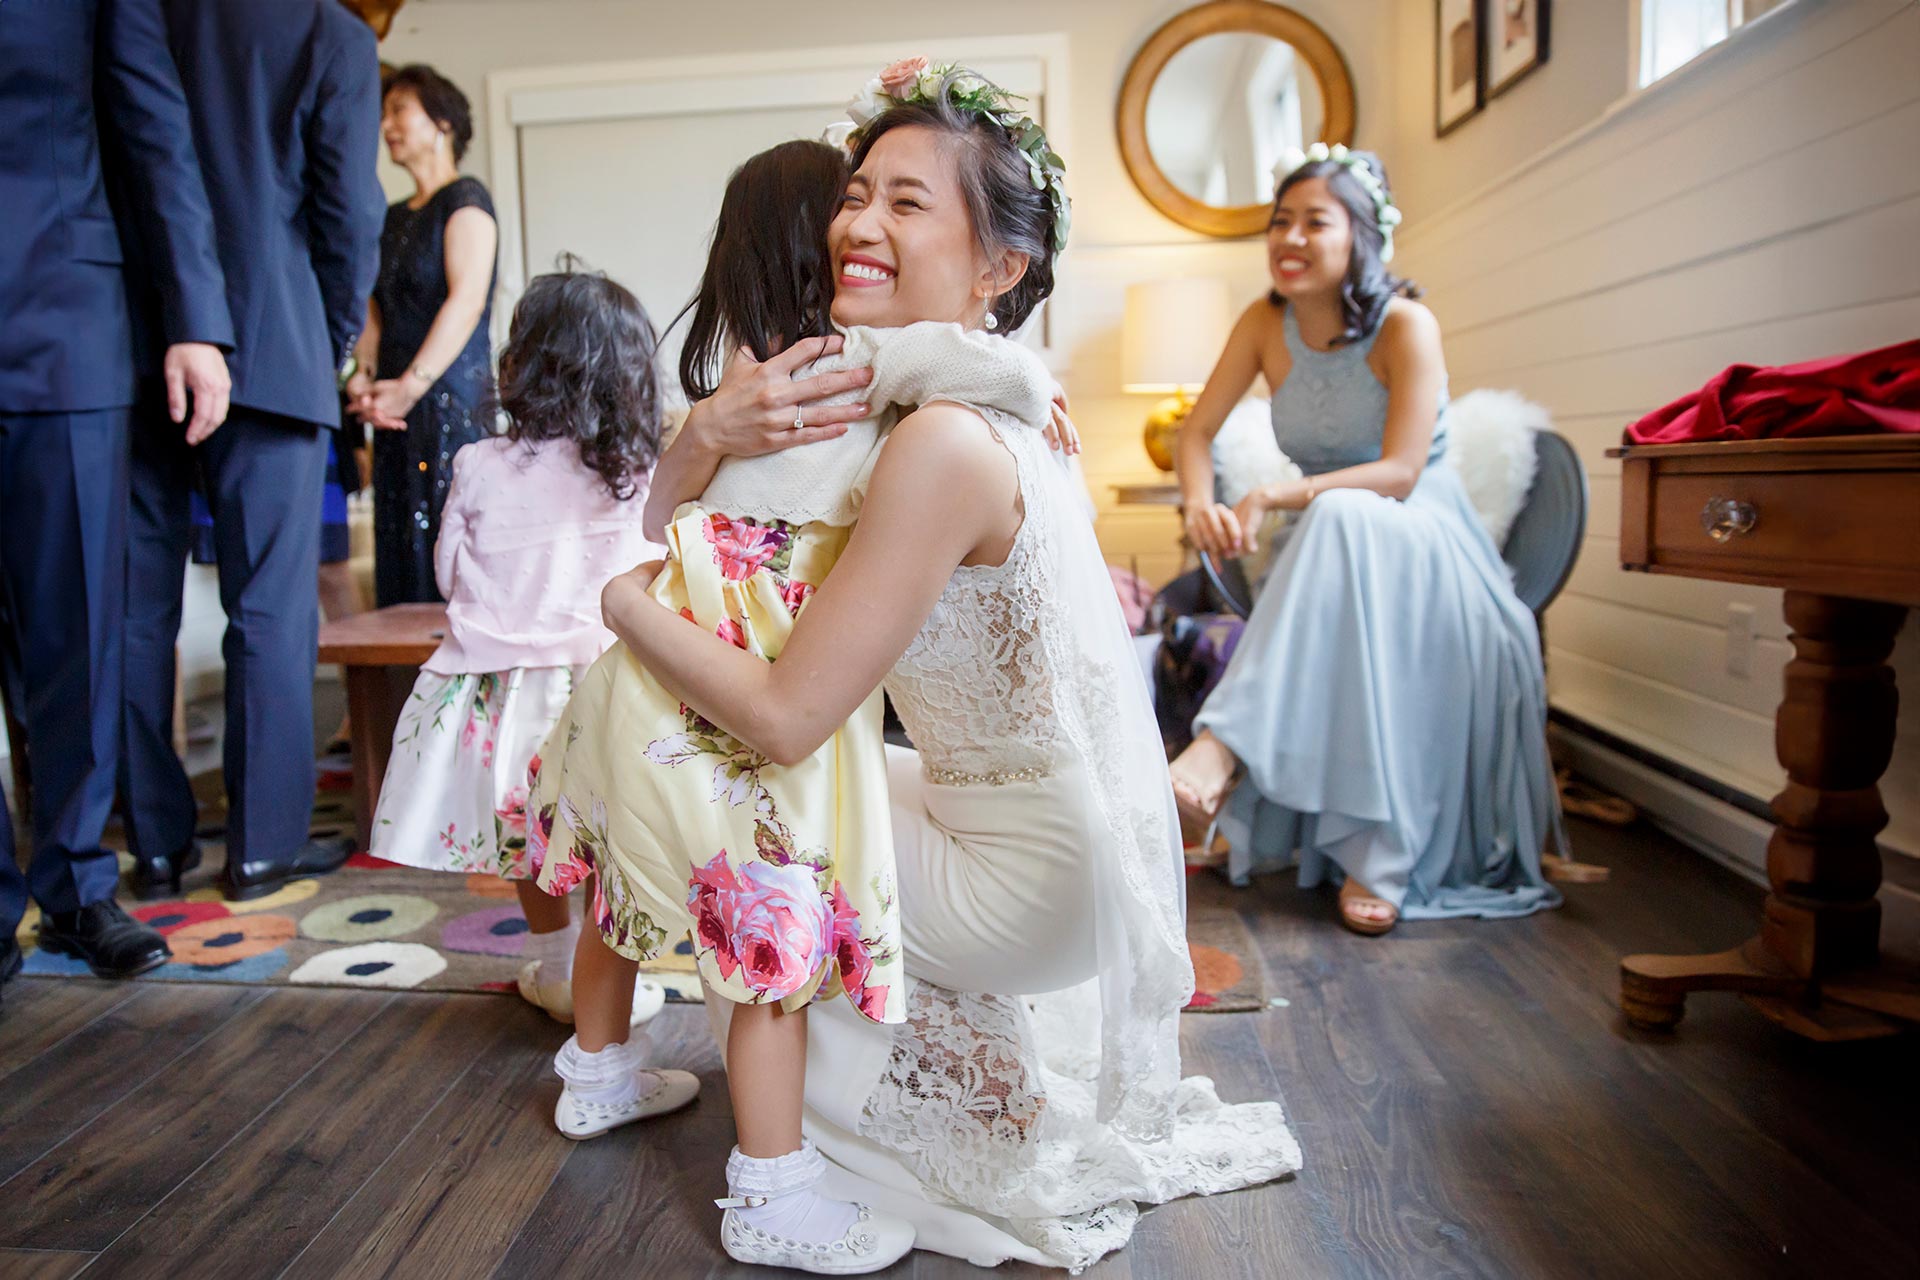 A bride hugs her flower girl before the wedding ceremony.